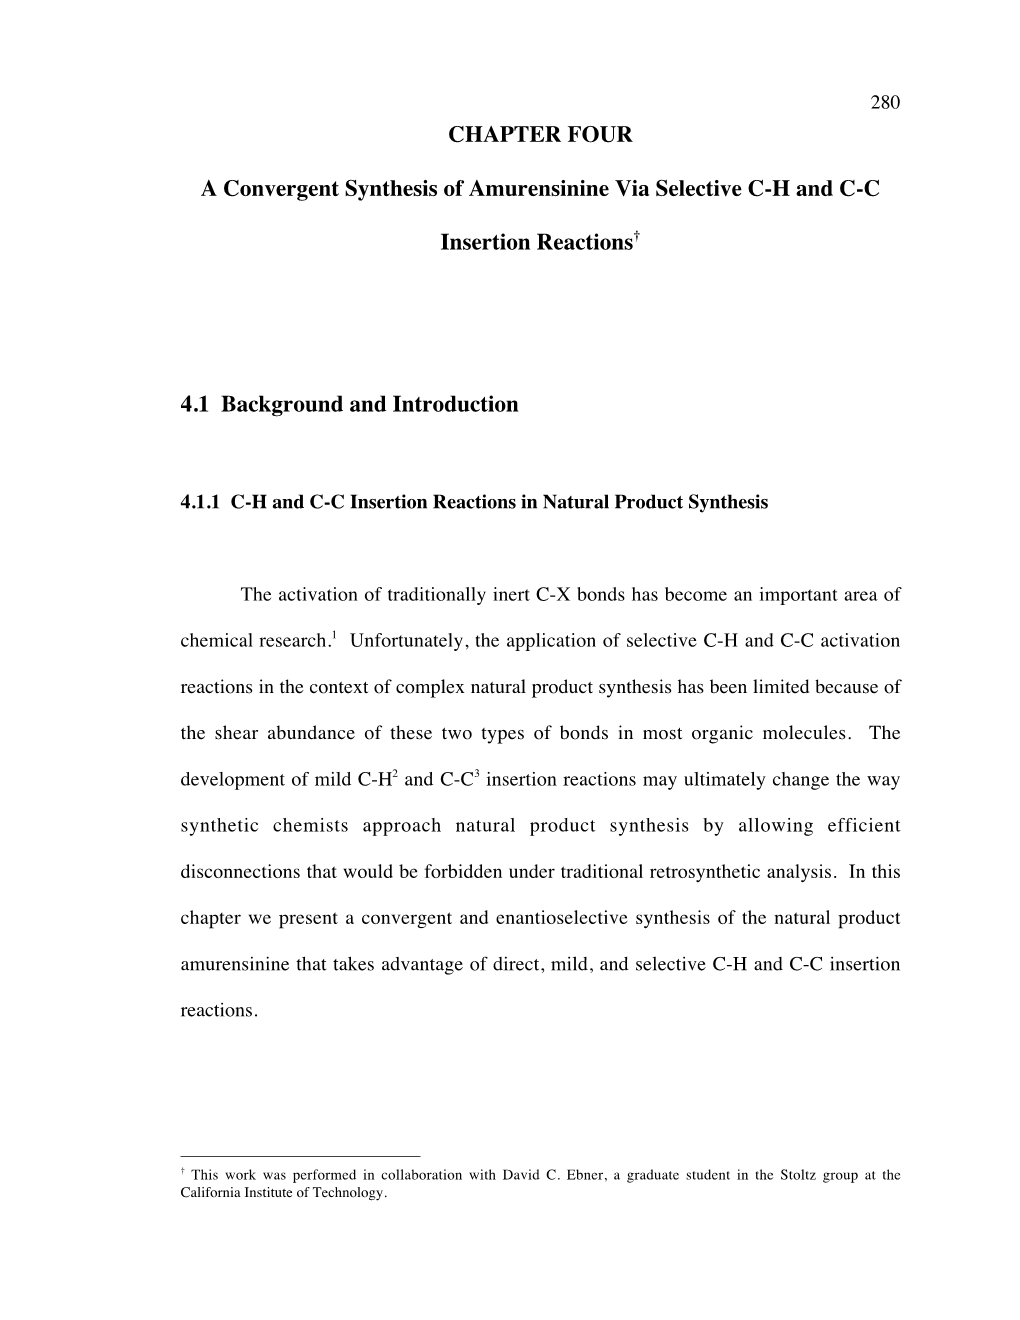 CHAPTER FOUR a Convergent Synthesis of Amurensinine Via Selective C-H and C-C Insertion Reactions† 4.1 Background and Introdu